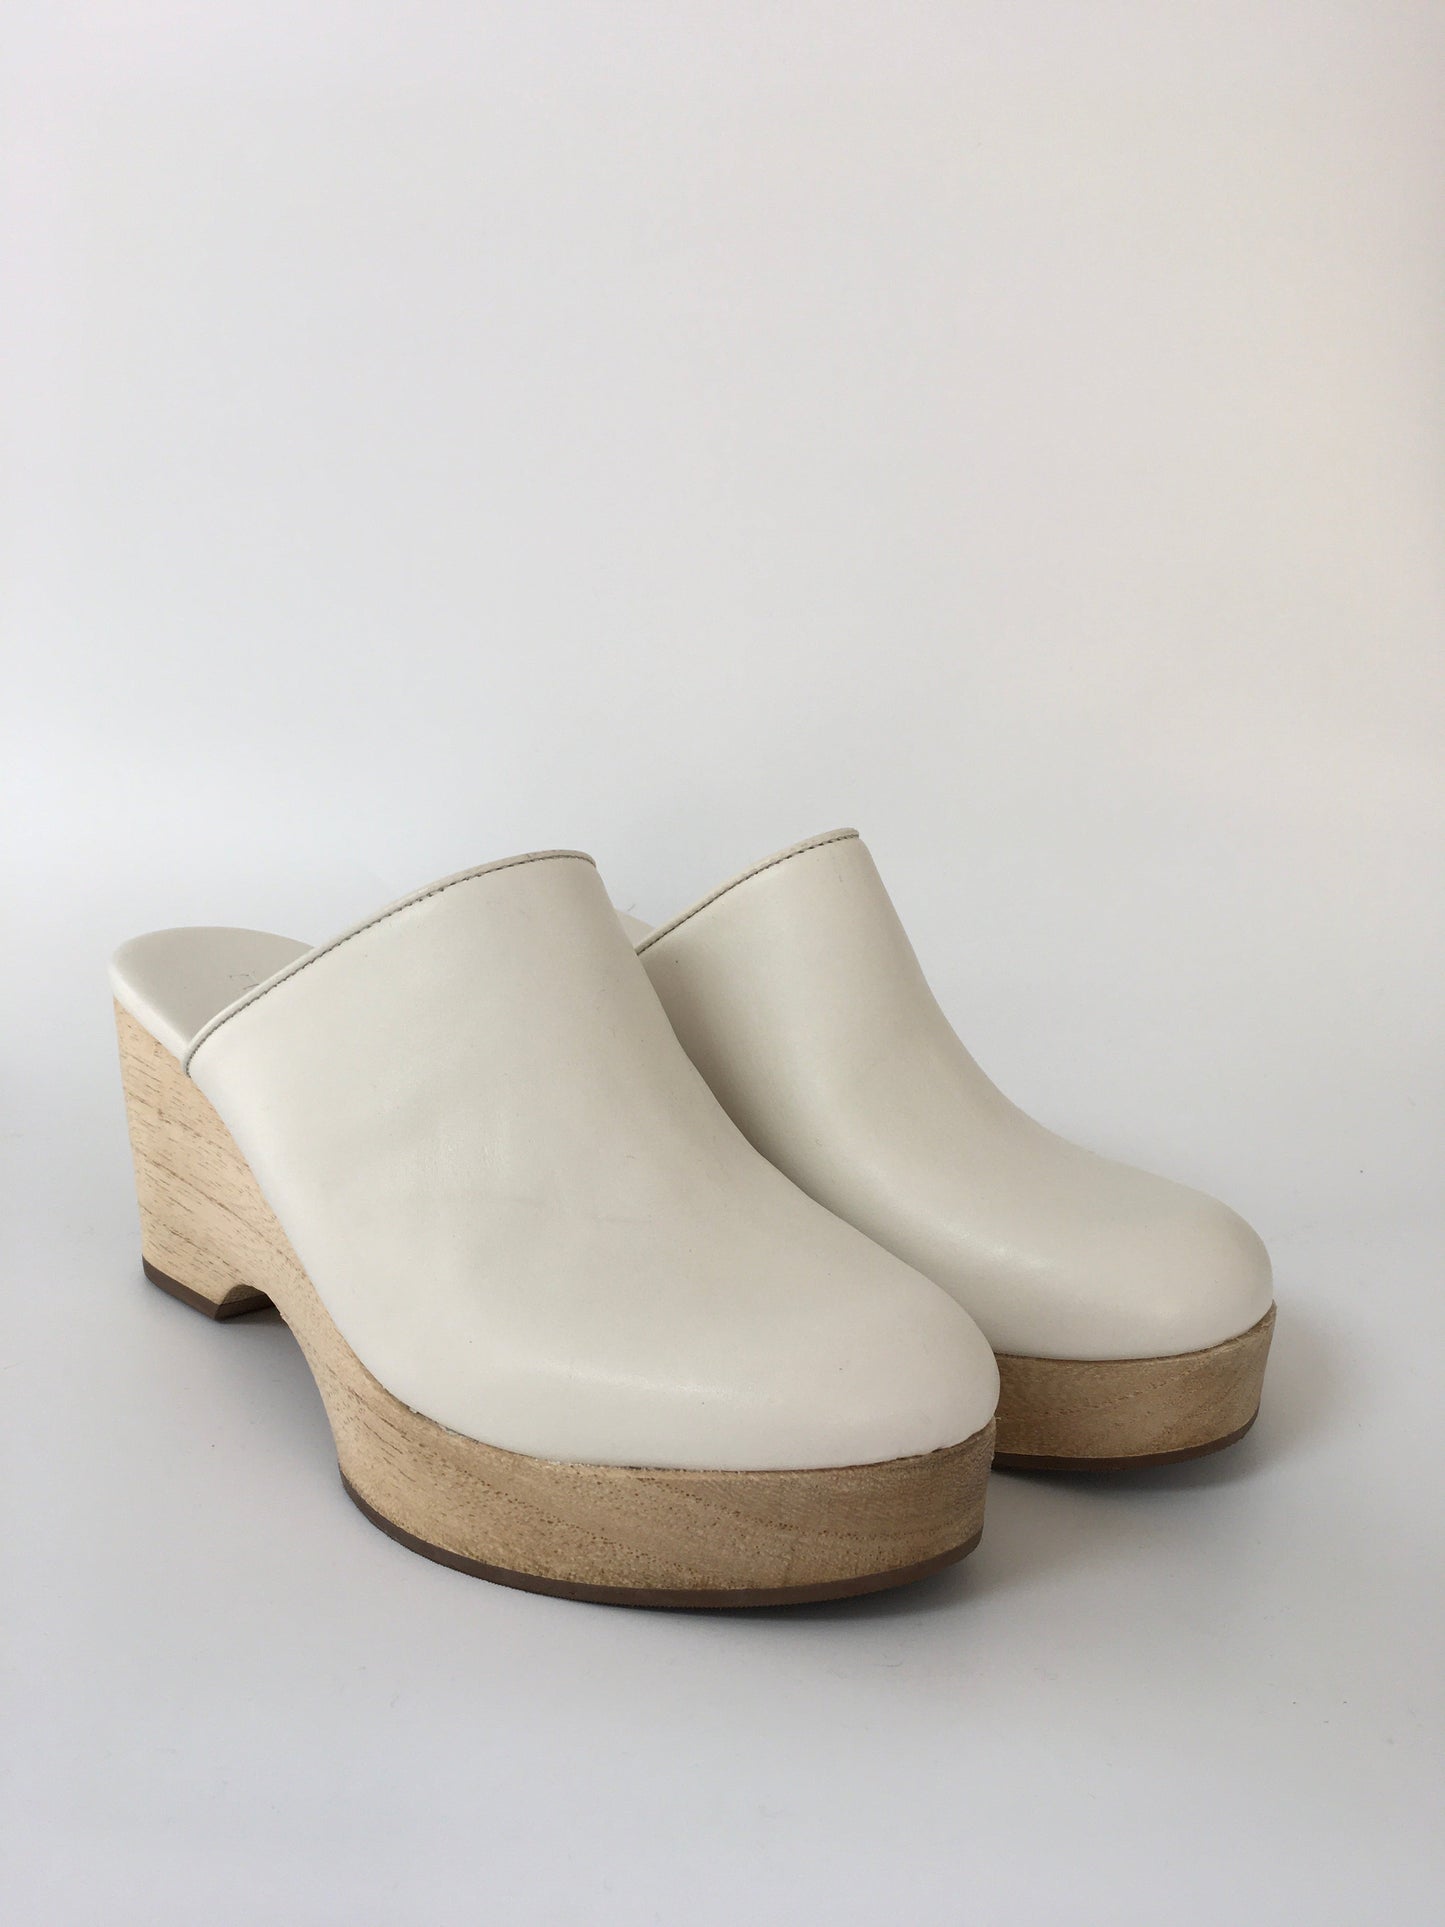 Shoes Heels Wedge By Everlane  Size: 7